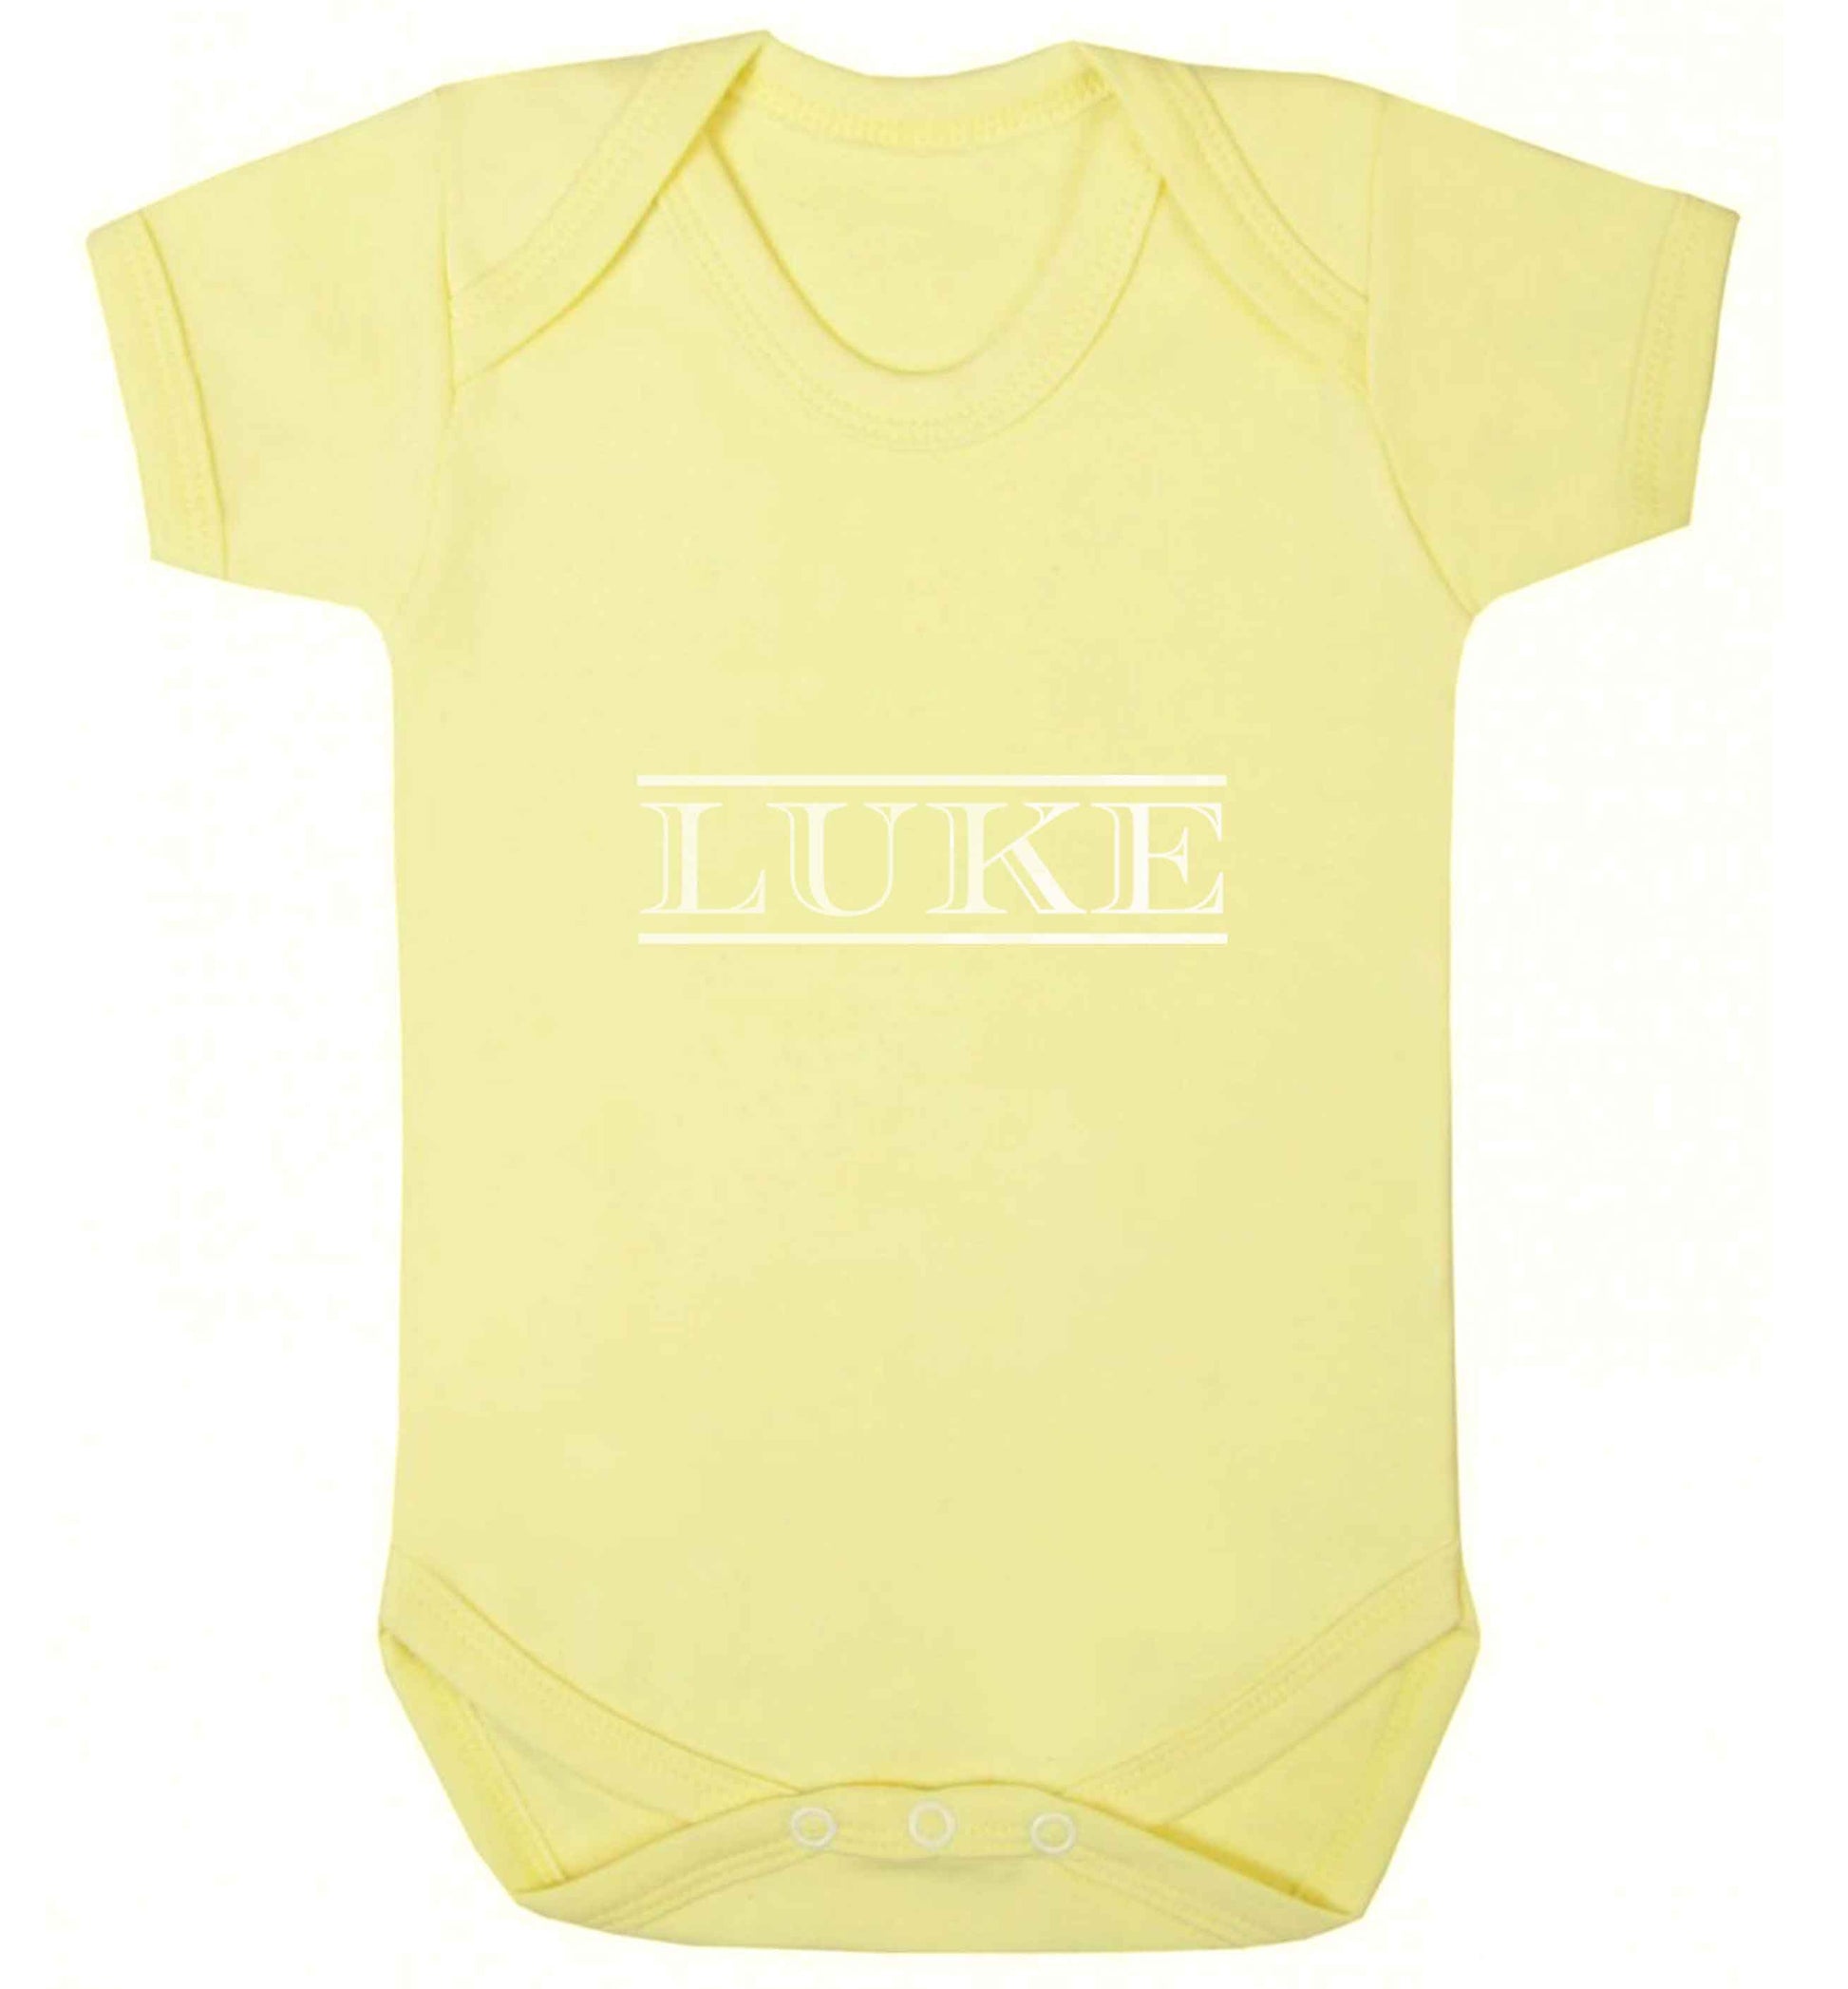 Personalised name baby vest pale yellow 18-24 months